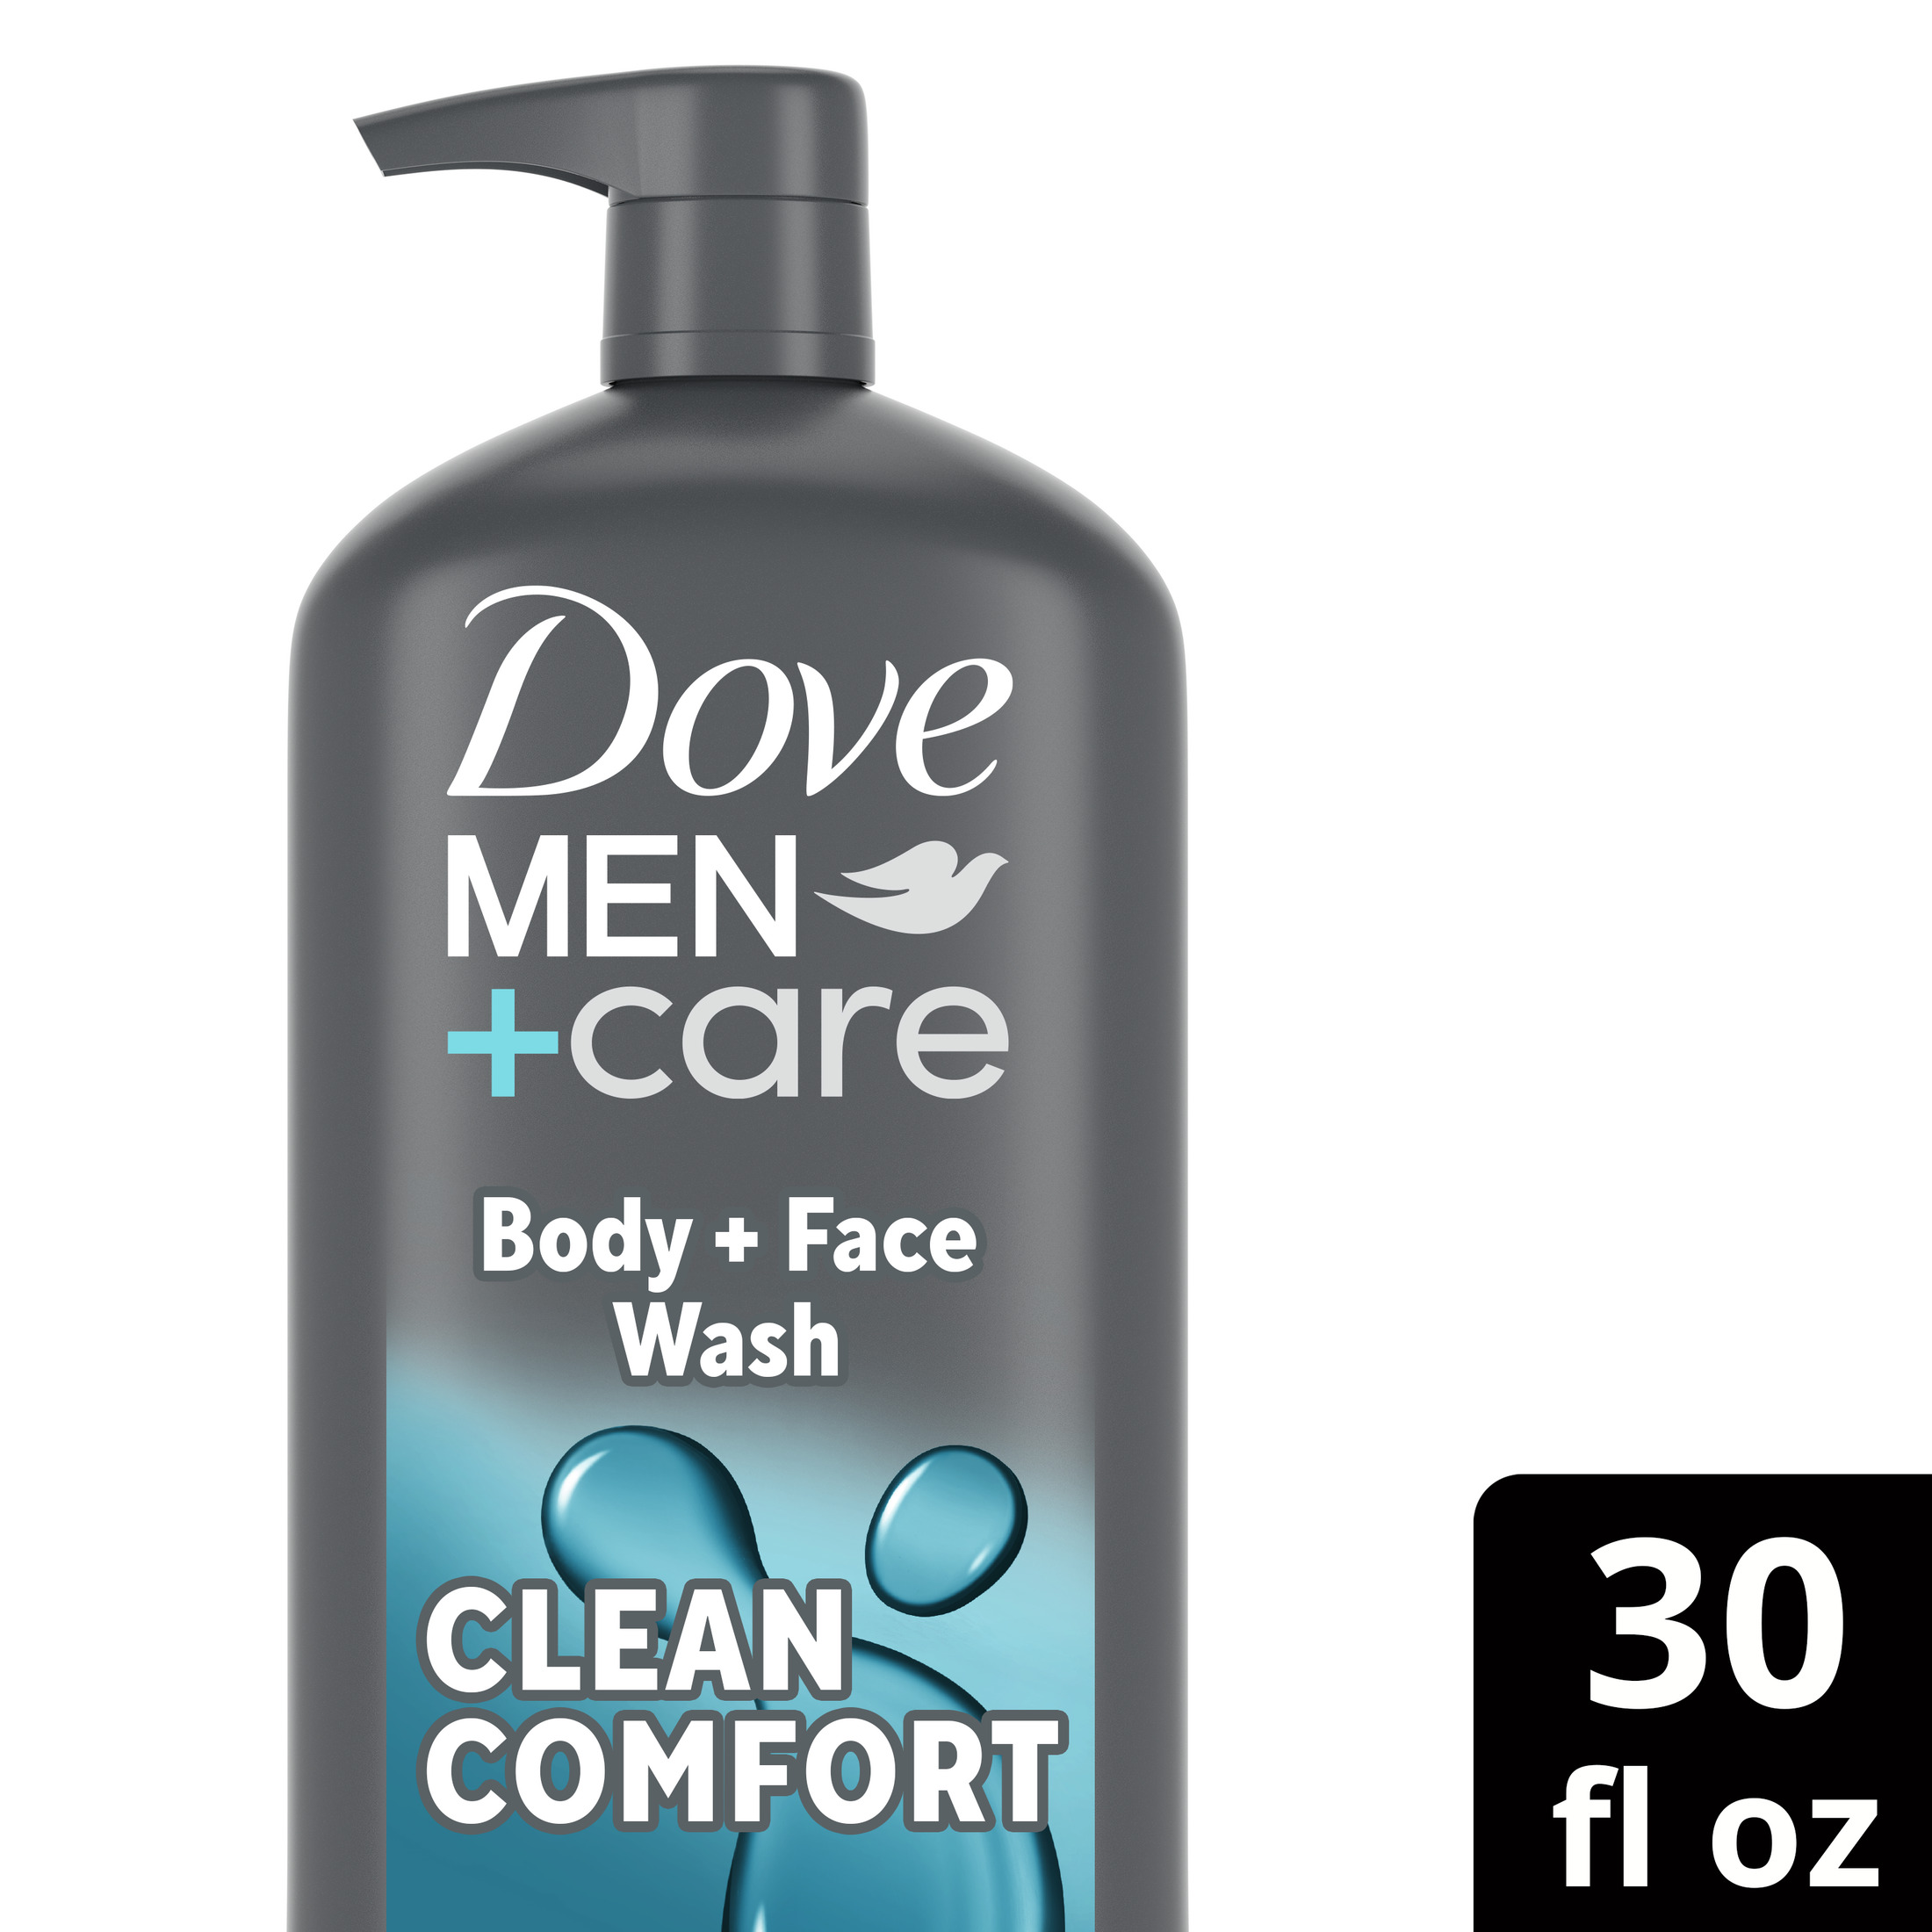 Dove Men+Care Clean Comfort Hydrating Face and Body Wash, 30 fl oz - image 3 of 14